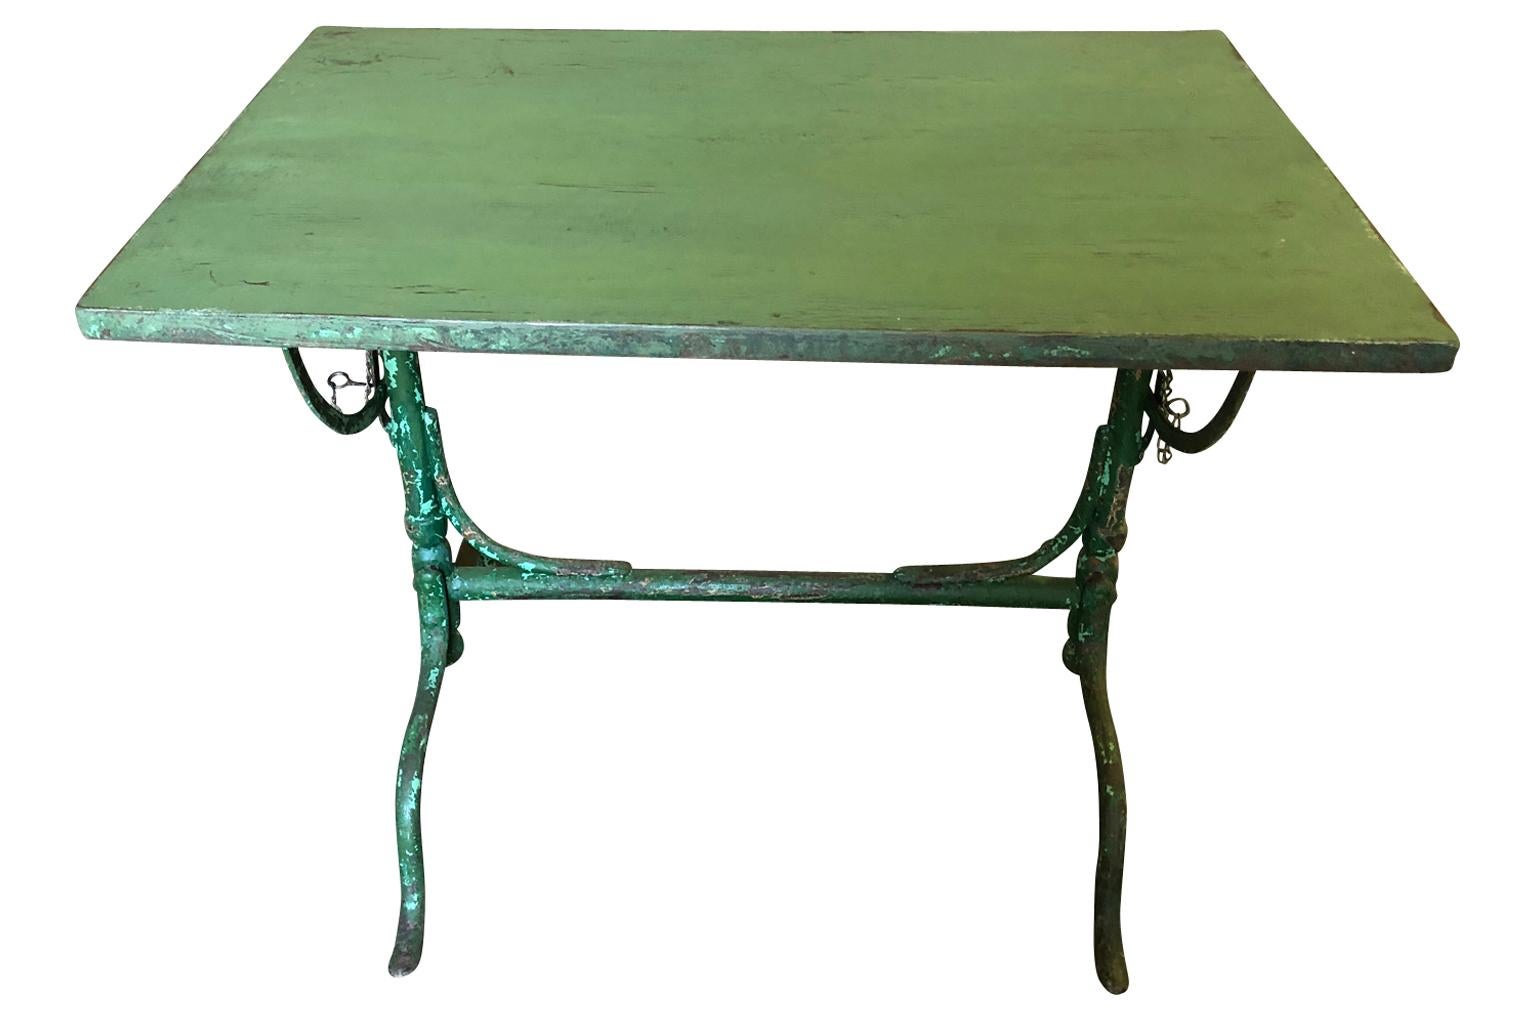 A charming late 19th-early 20th century tilt top garden table in painted iron from the Provence region of France.